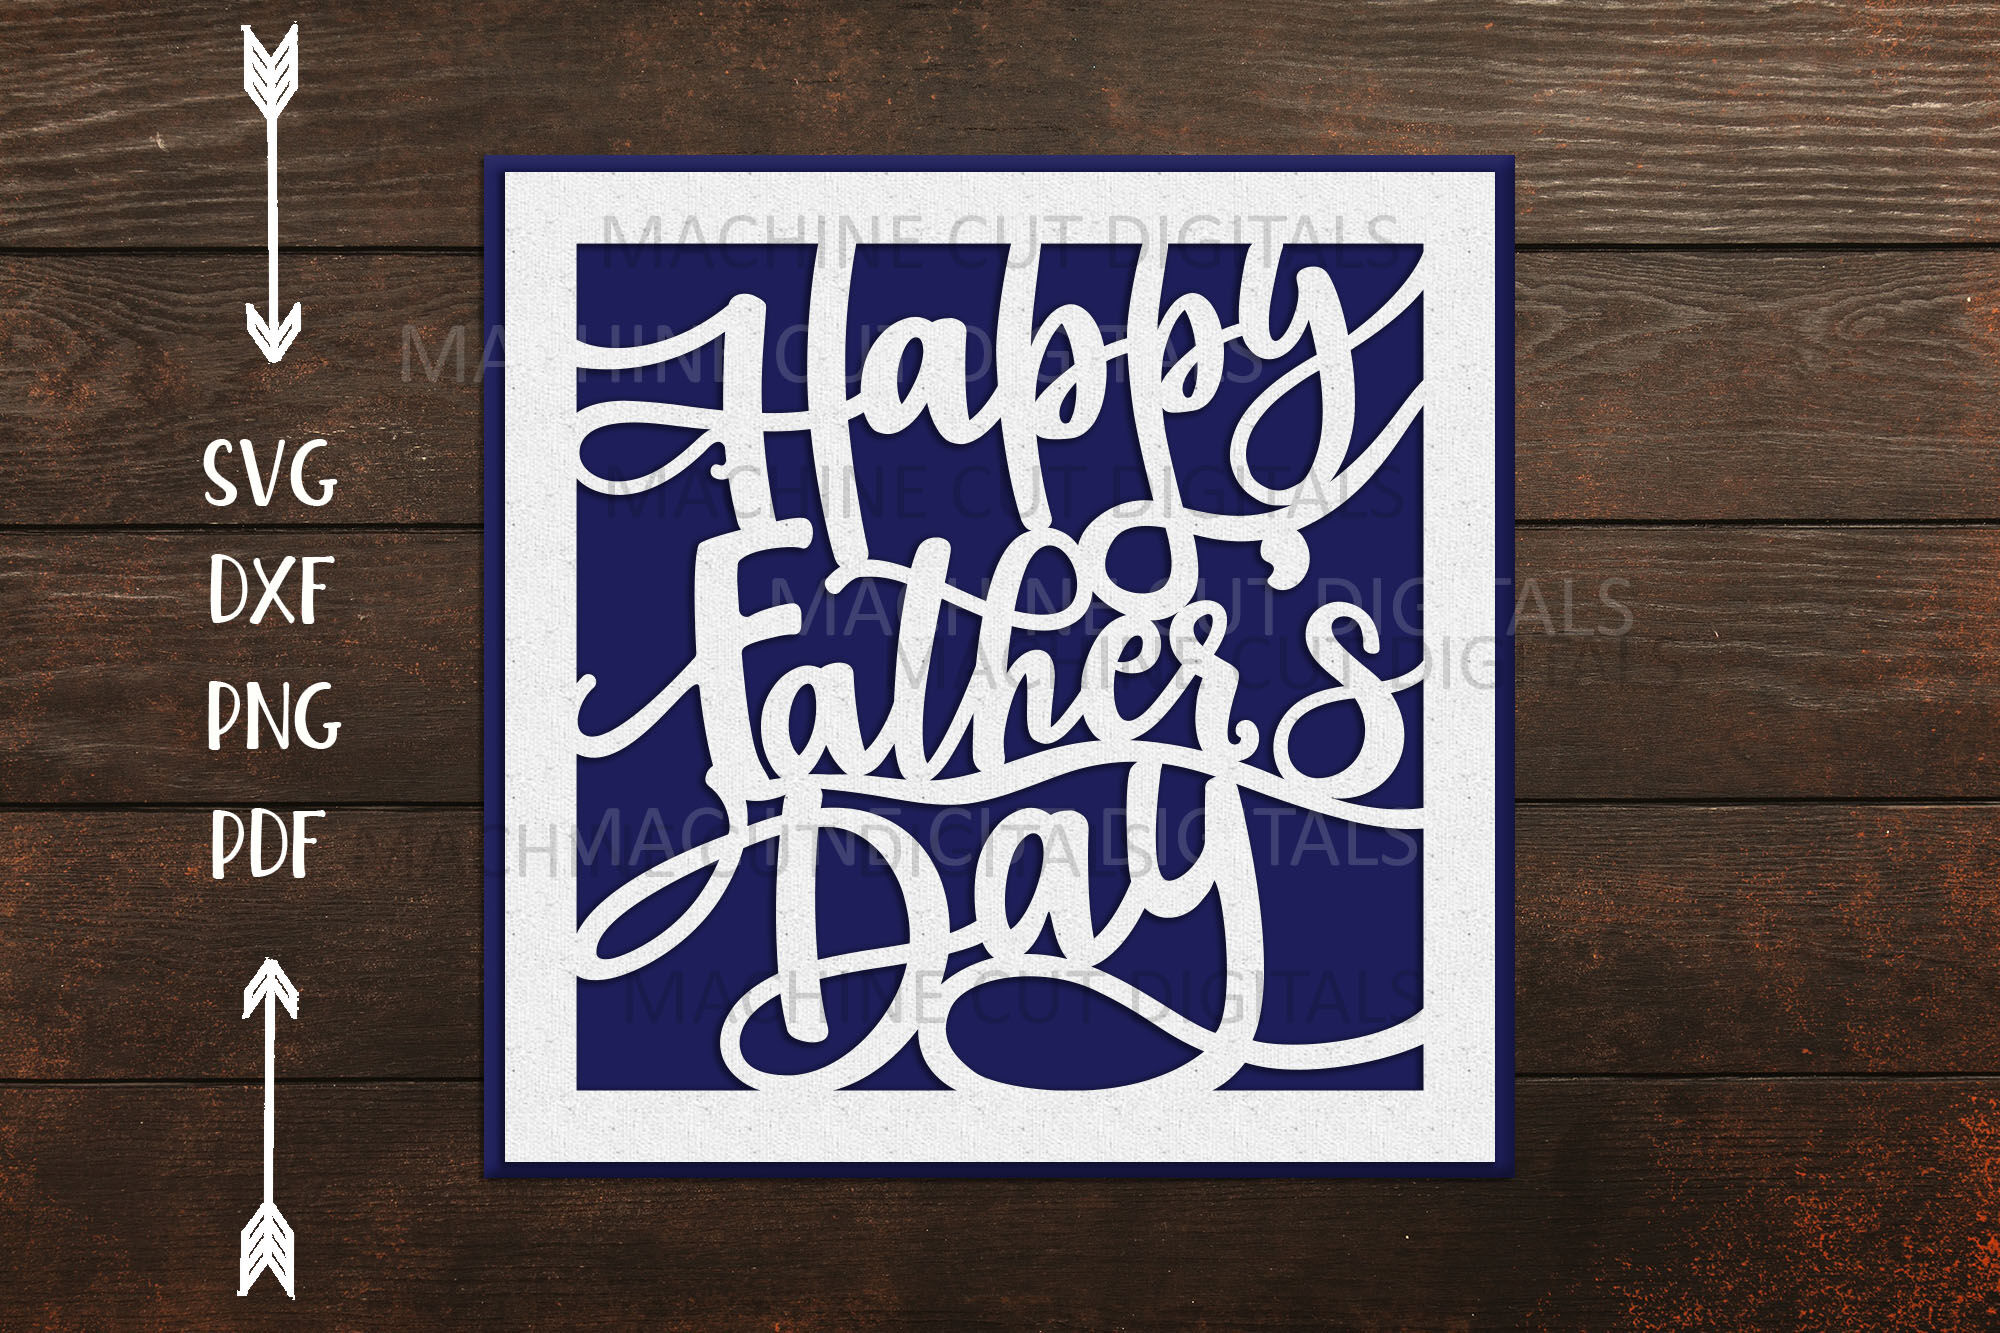 Happy Fathers Day Cut Out Card Laser Cut Cricut Svg Dxf Png By Kartcreation Thehungryjpeg Com